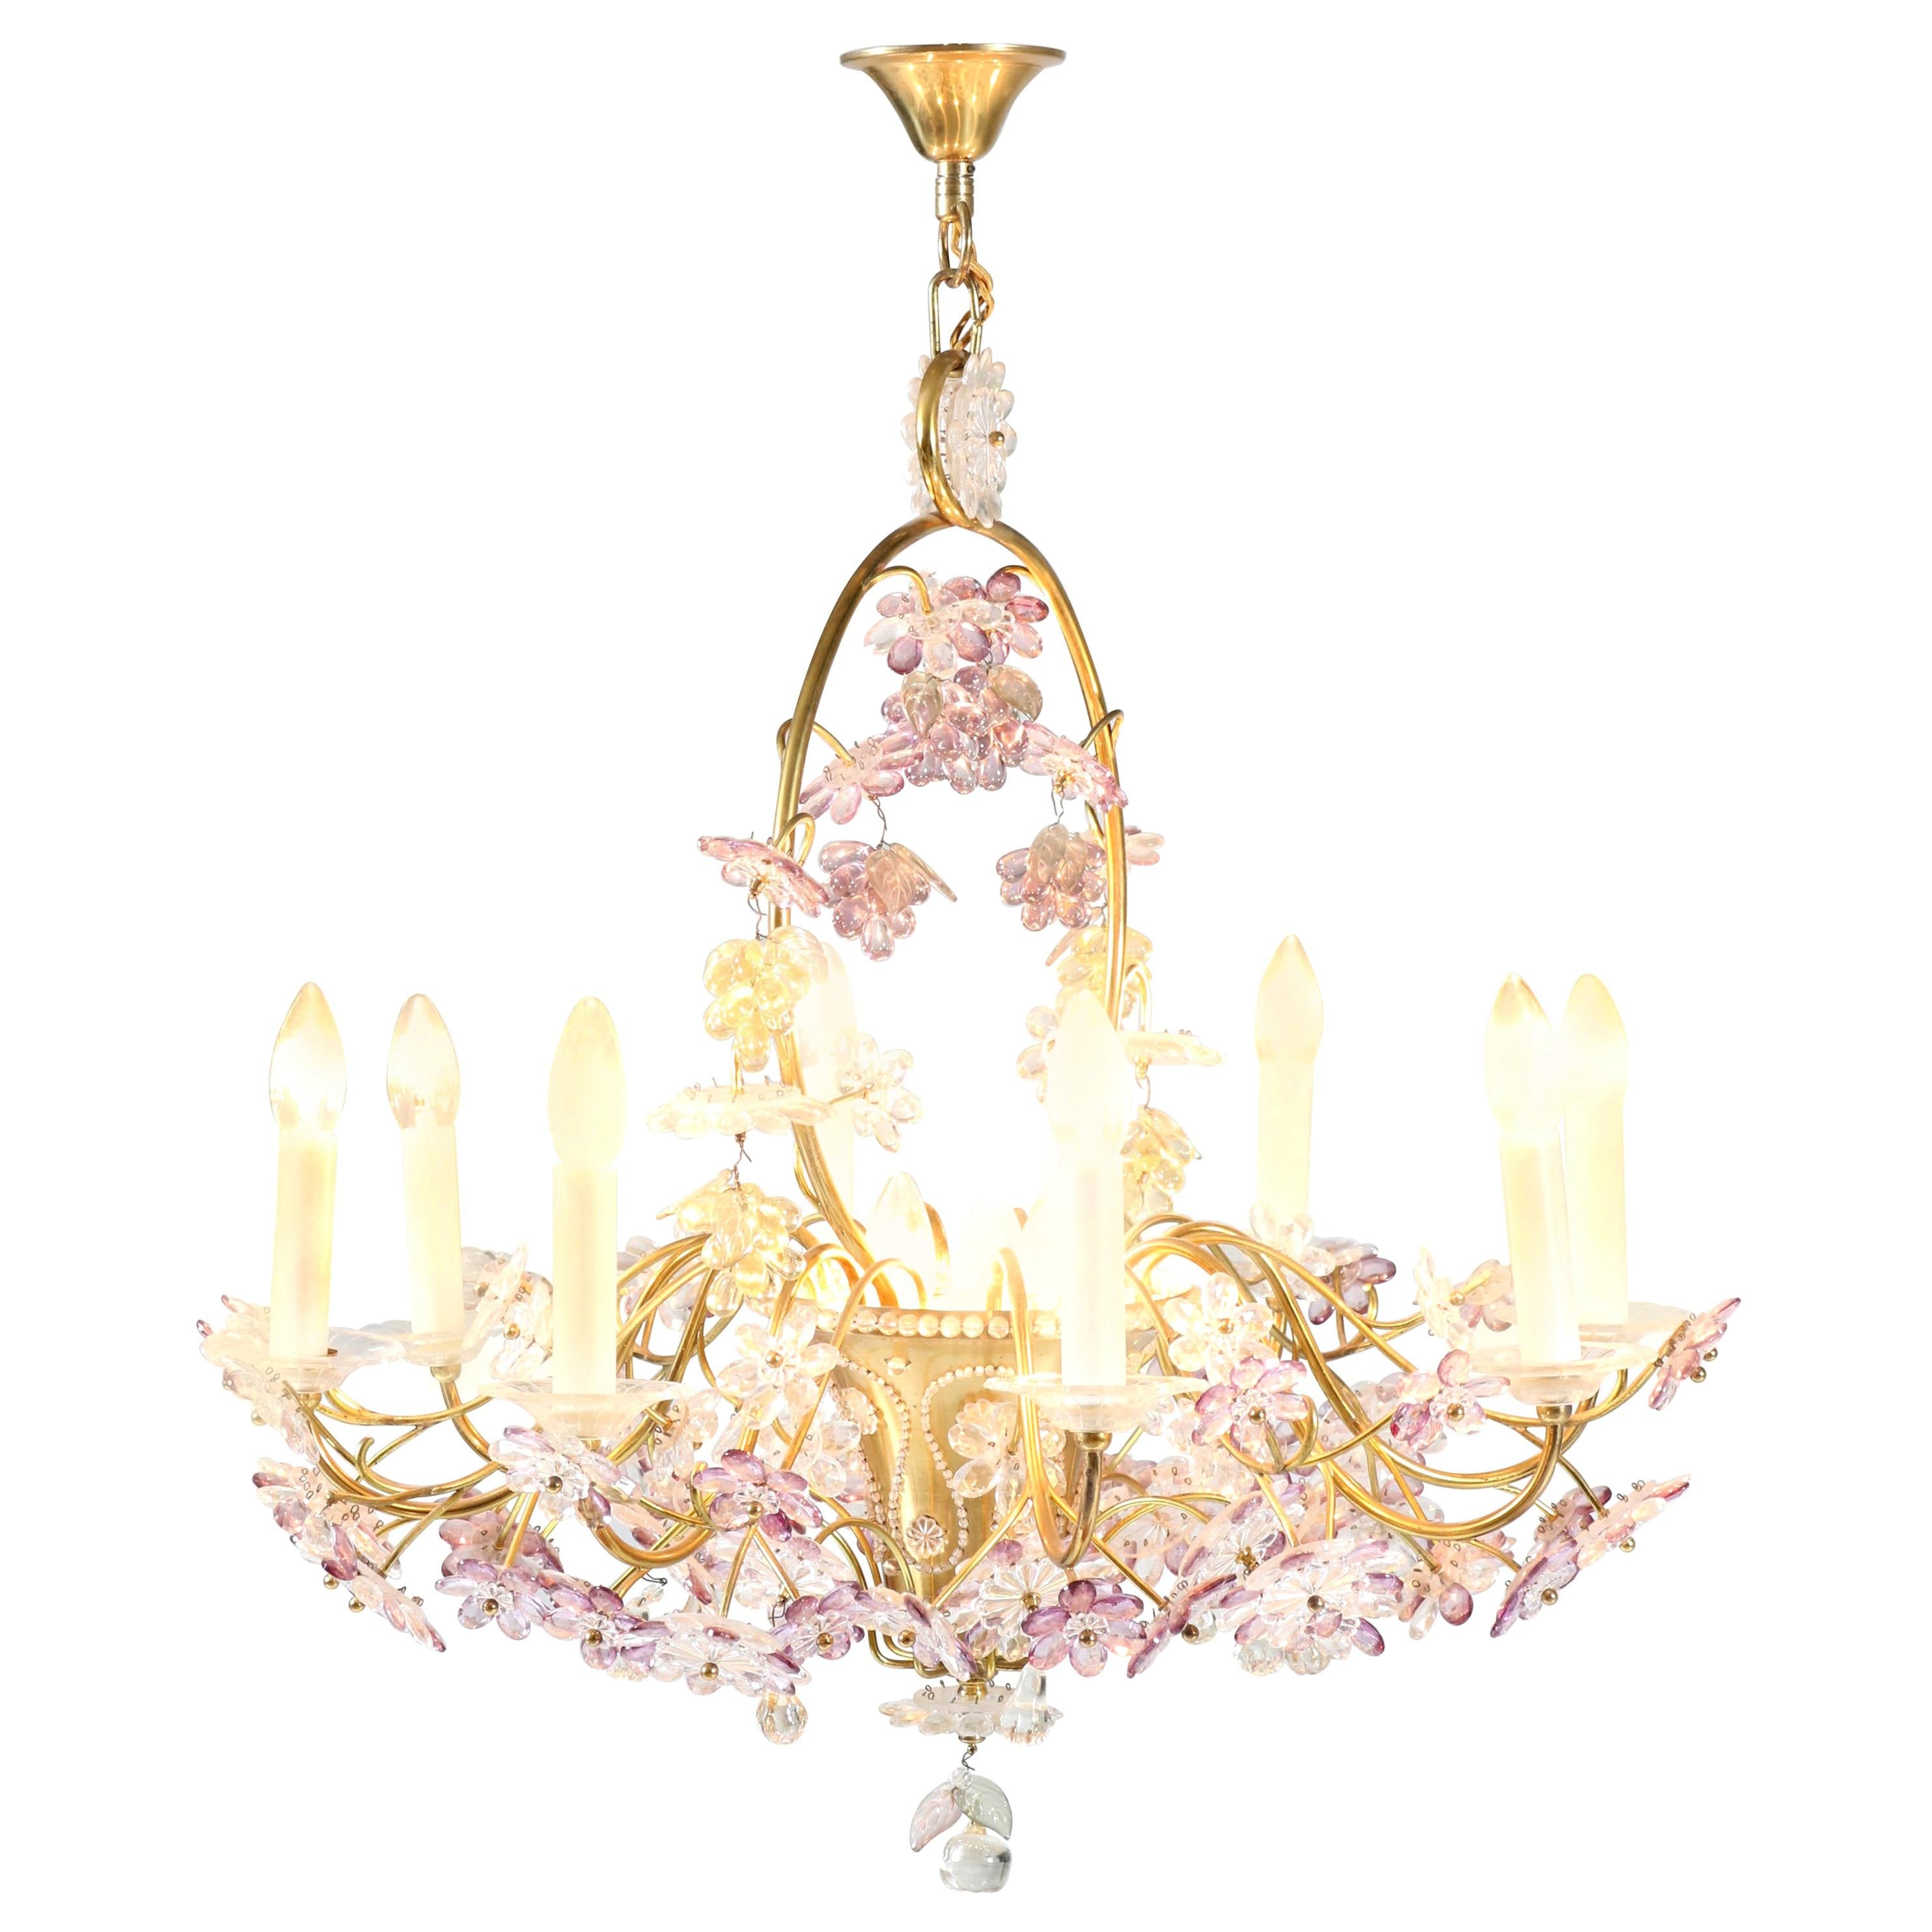 French Floral Amethyst Crystal Chandelier in the style of Maison Baguès, 1950s